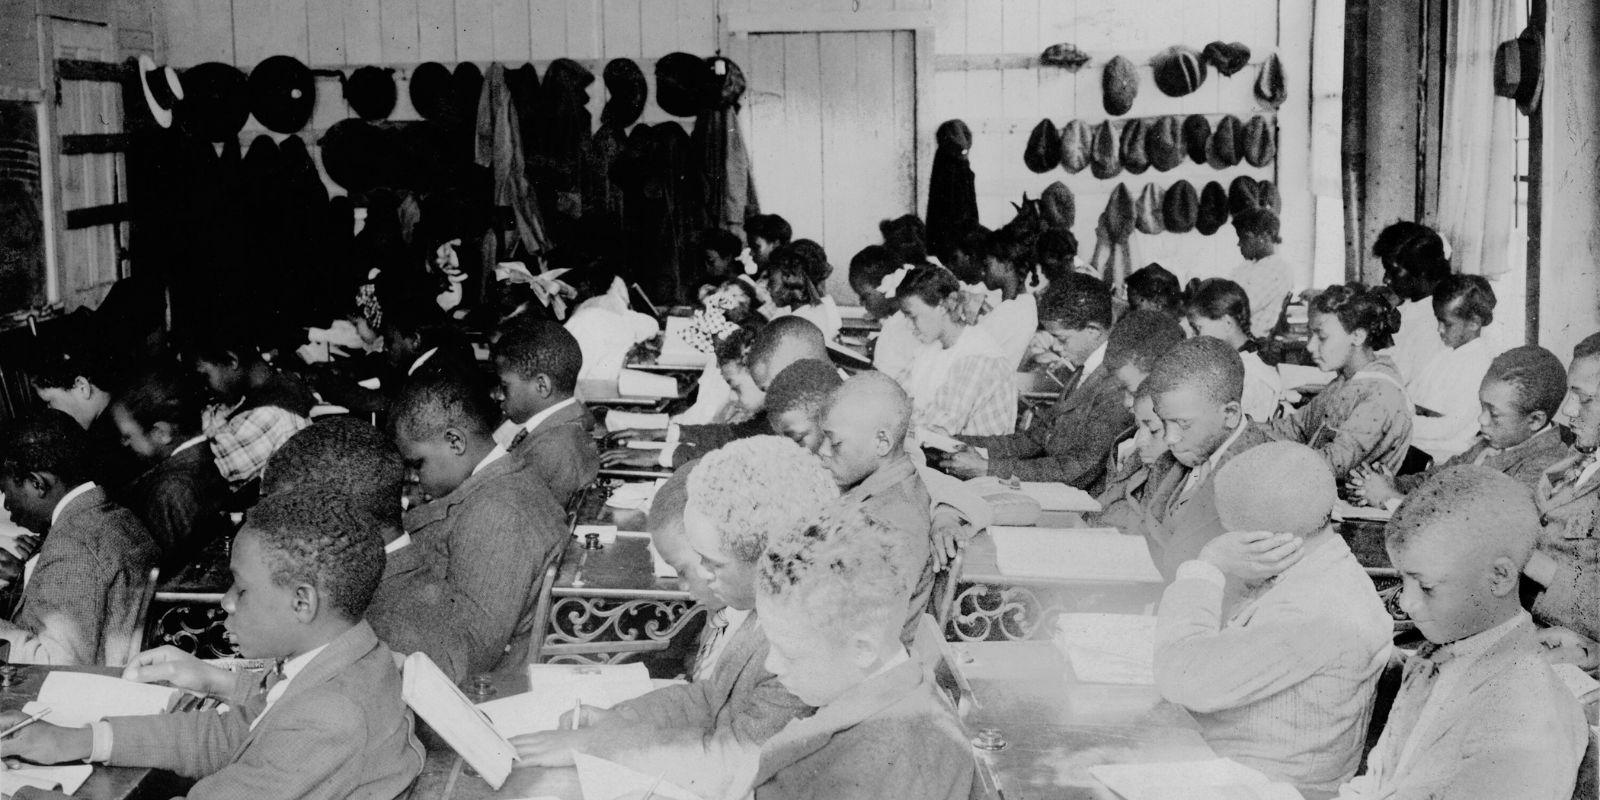 May 17th: Racially Segregated Schools Declared As Unconstitutional